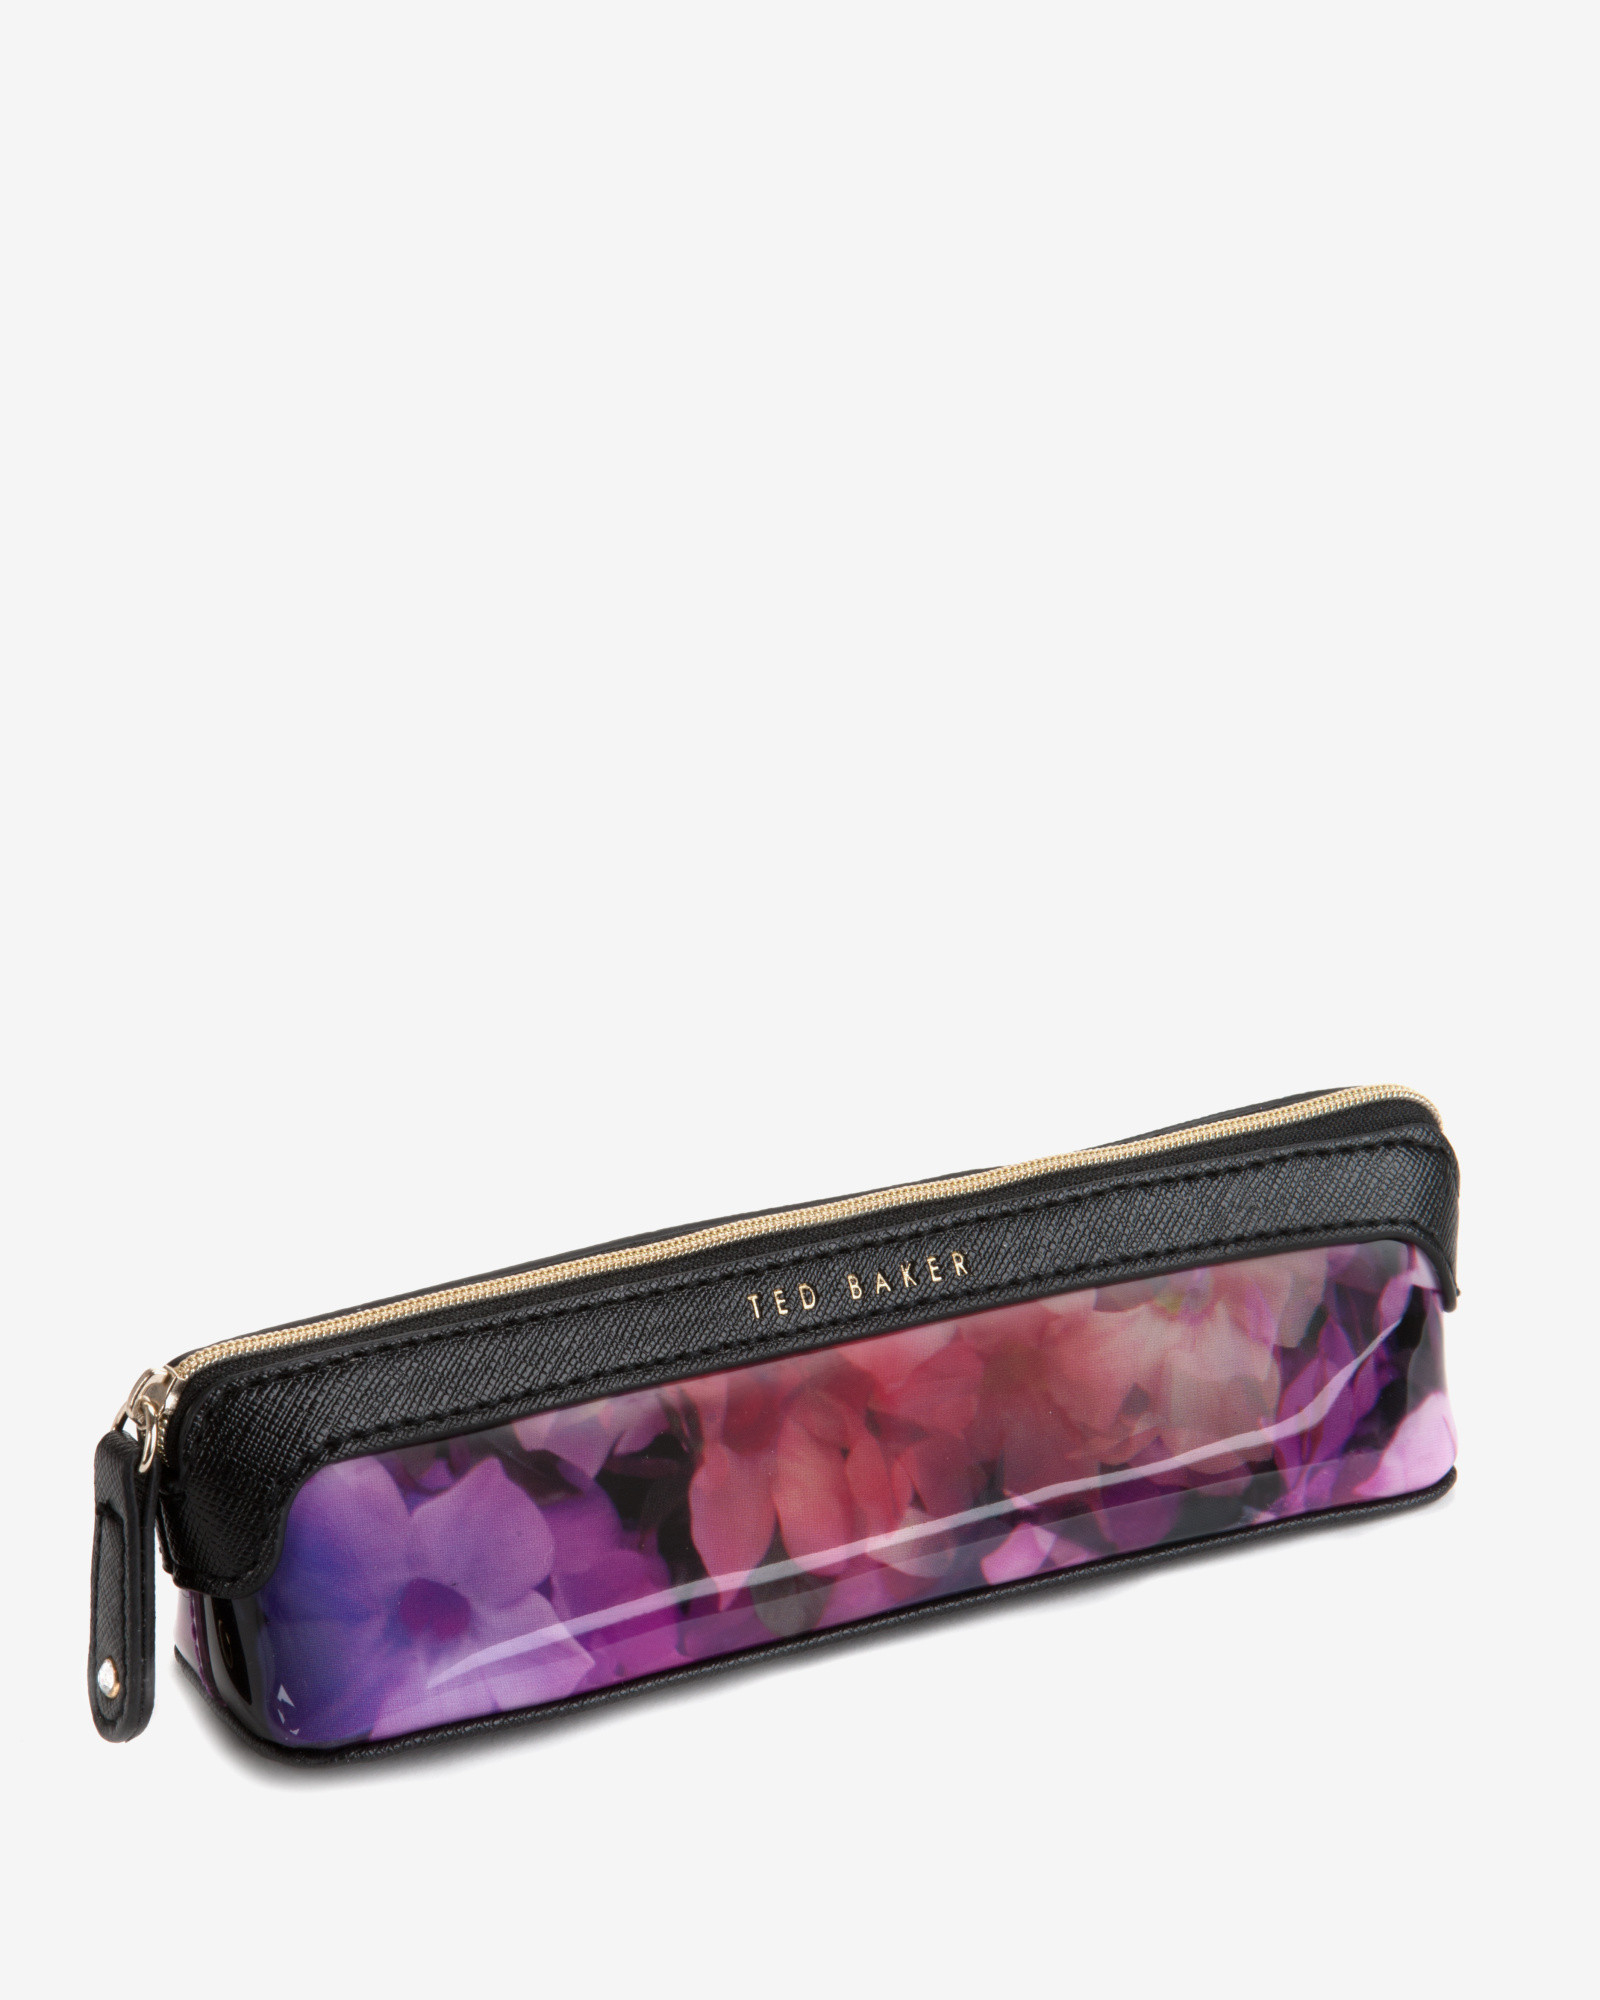 Ted Baker Cascading Floral Pencil Case in Black - Lyst